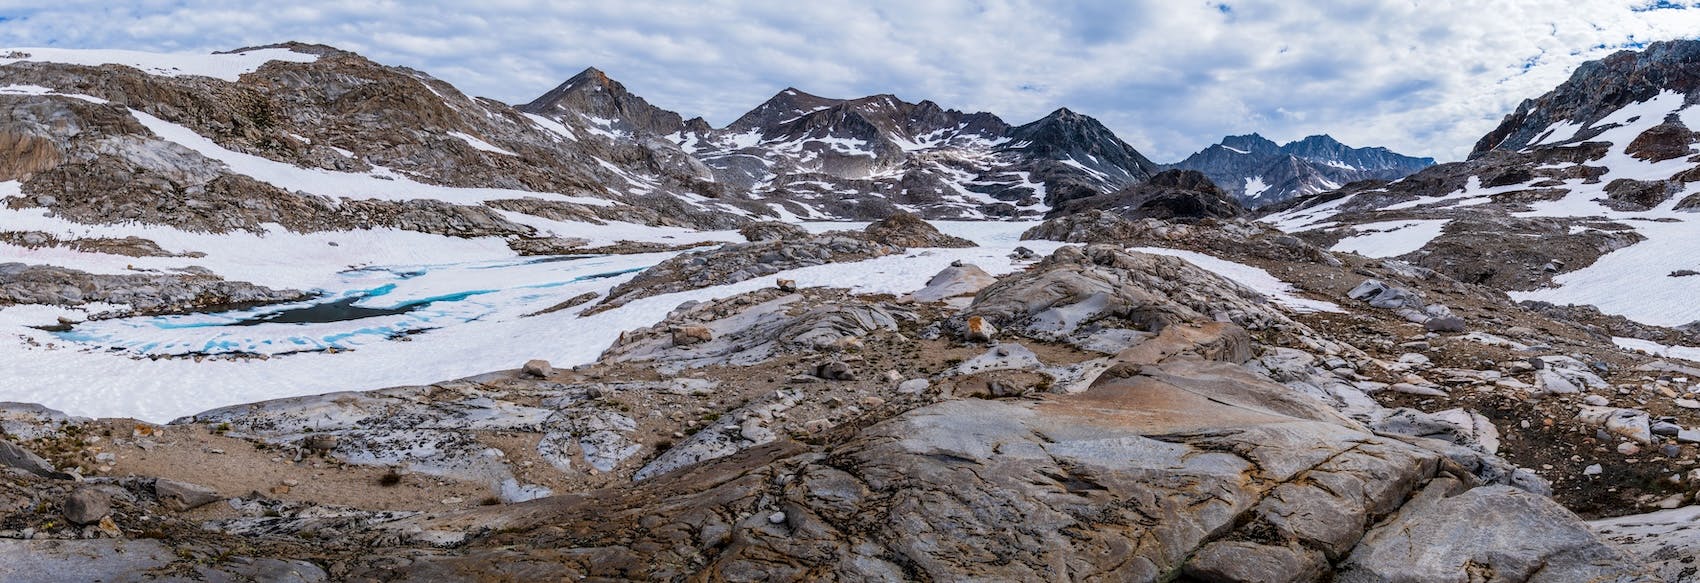 Frozen lakes below Muir Pass in Kings Canyon National Park